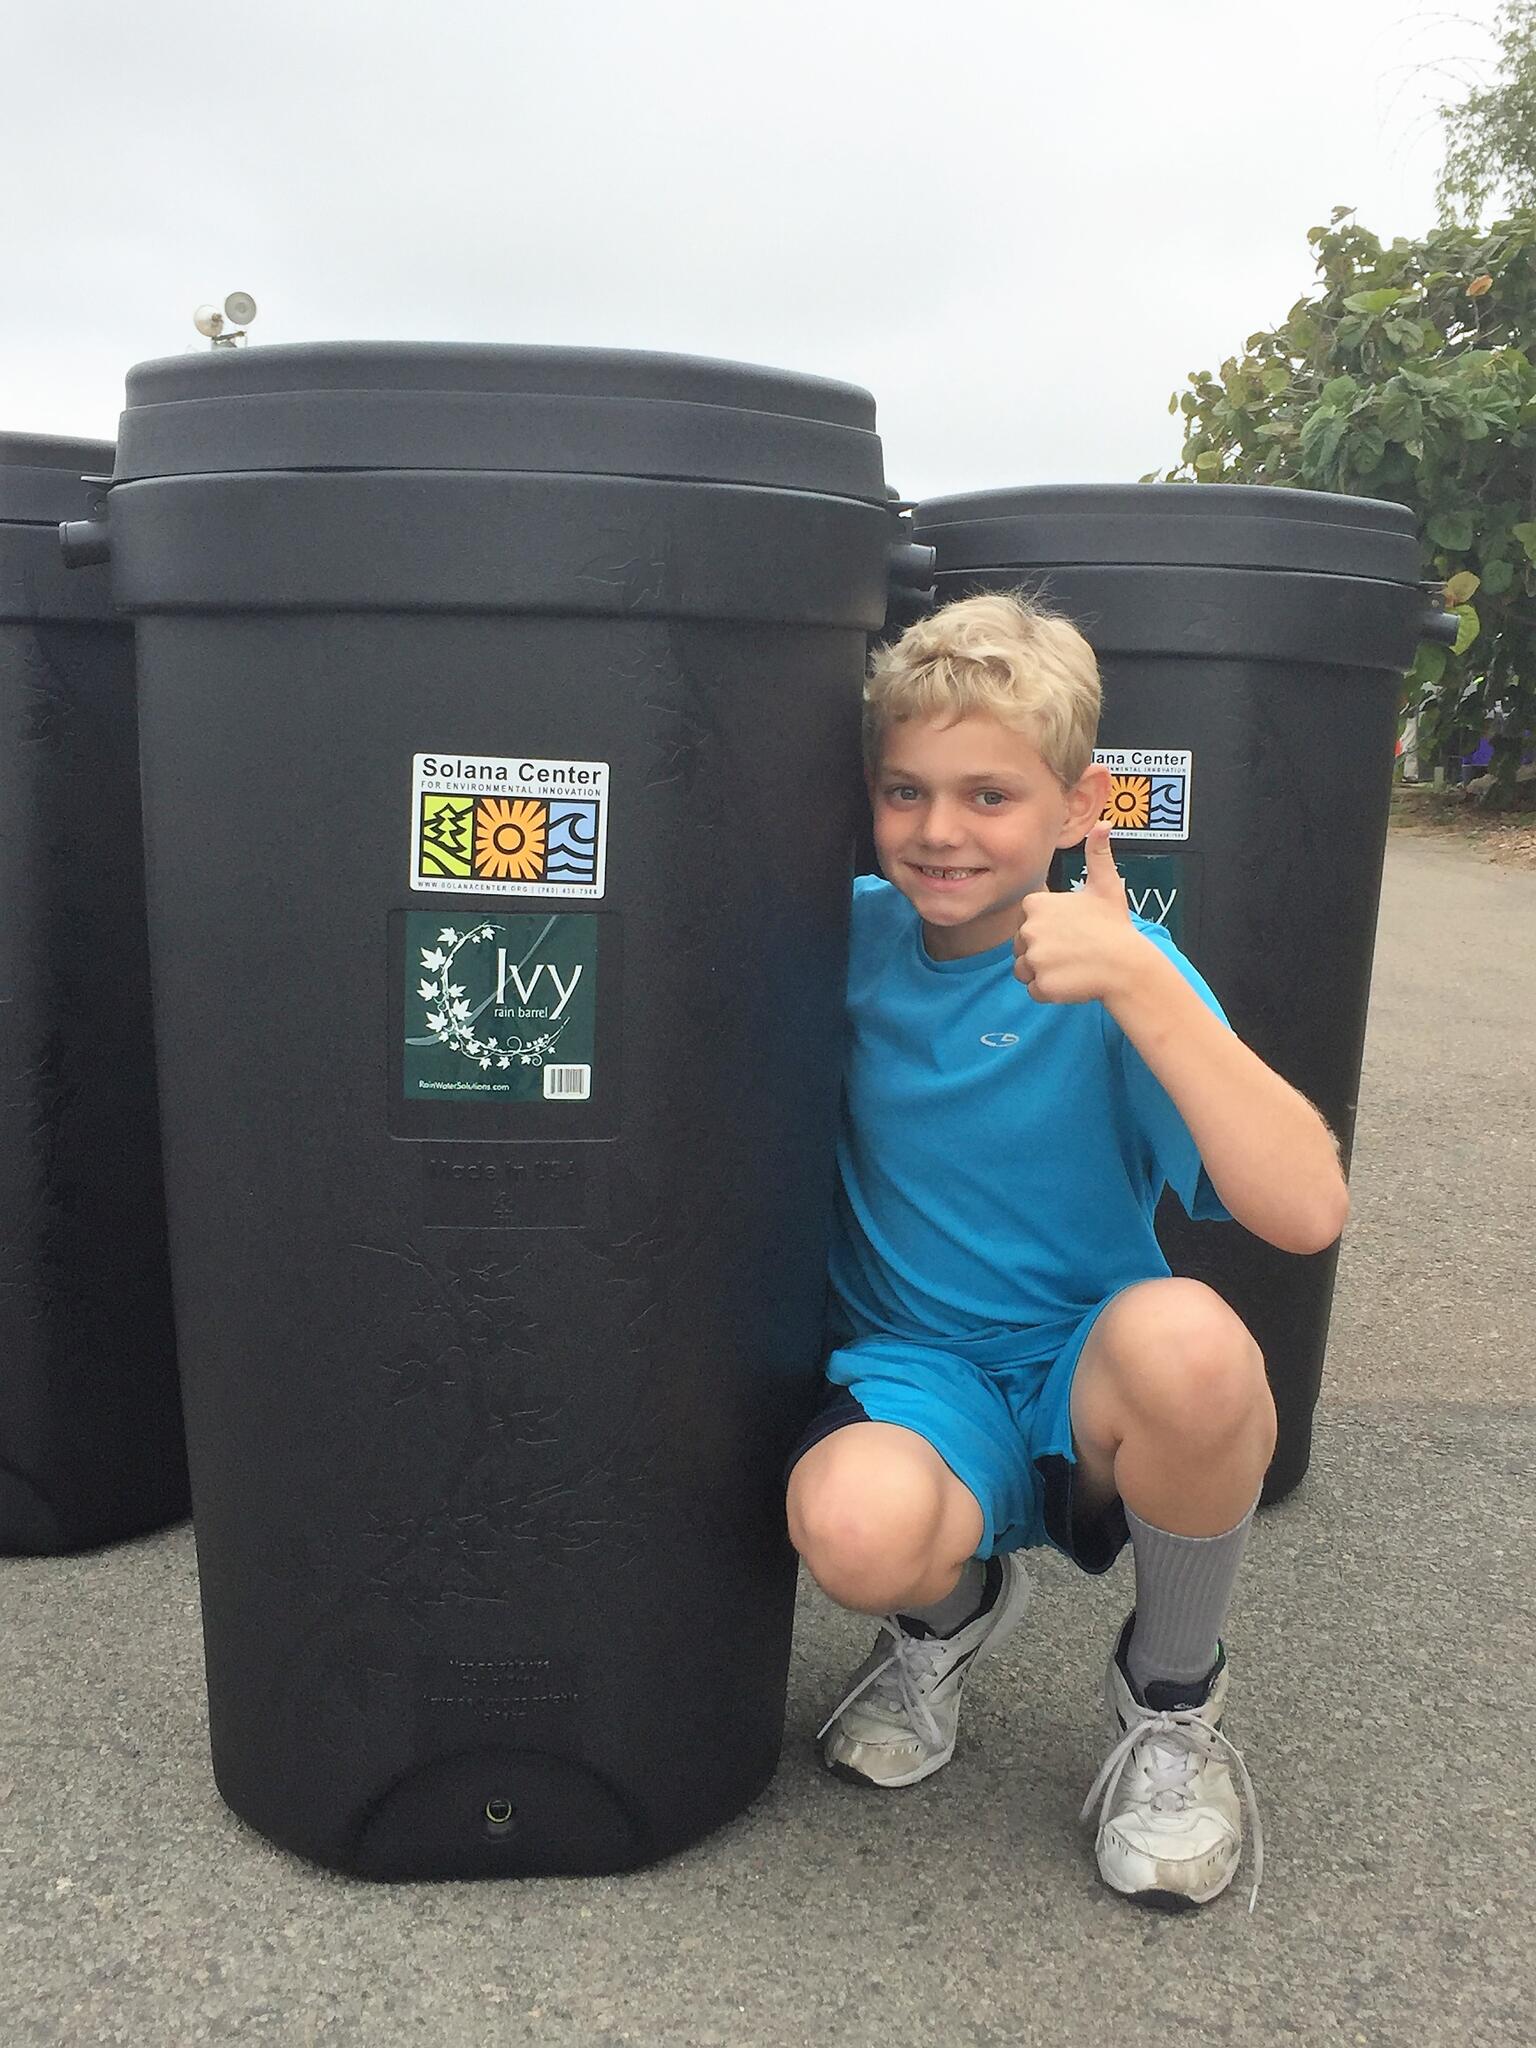 north-county-water-agencies-offers-low-cost-rain-barrels-to-help